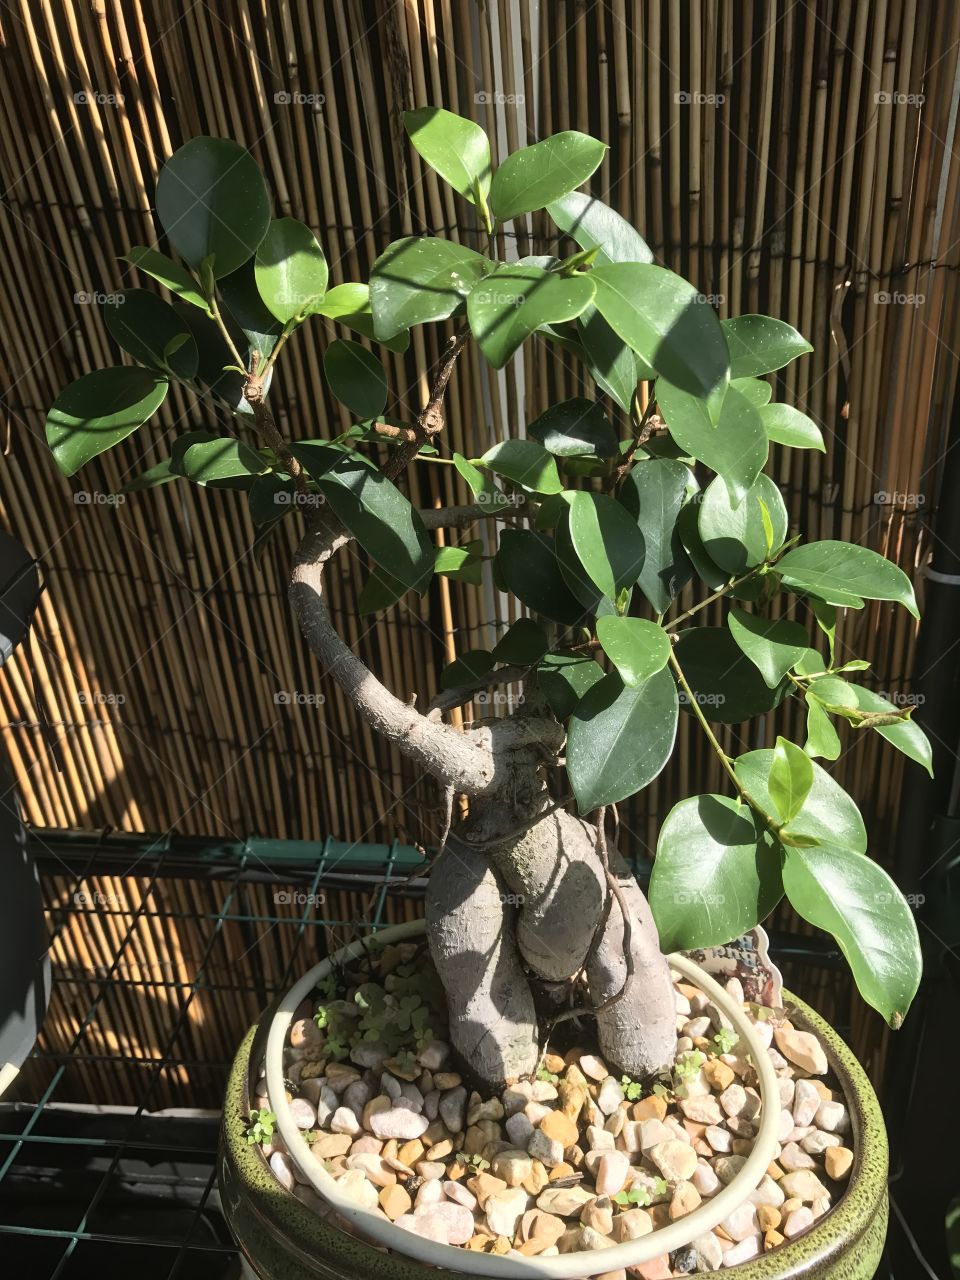 This is my first bonsai. It was purchased at a local nursery for approximately $10. This is a pot-bellies fig which has an impressive triple trunk. 